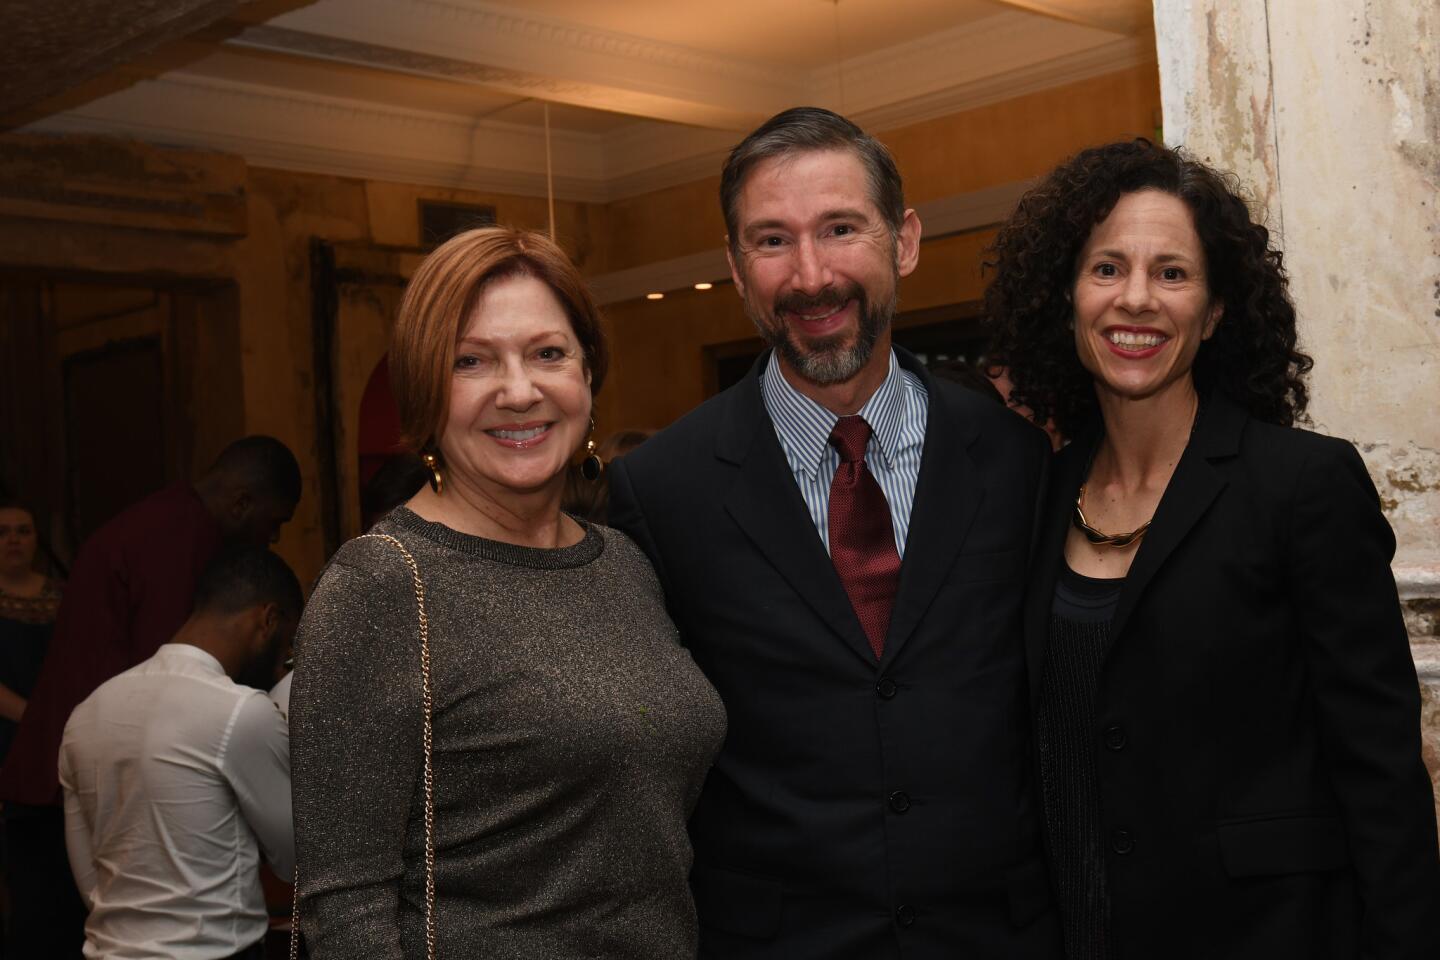 Suzan Garabedian, John Tis and Adrienne Peres attended Maryland Film Festival's Director's Cut: A Celebration of Jed Dietz at The Stavros Niarchos Foundation Parkway Theatre.